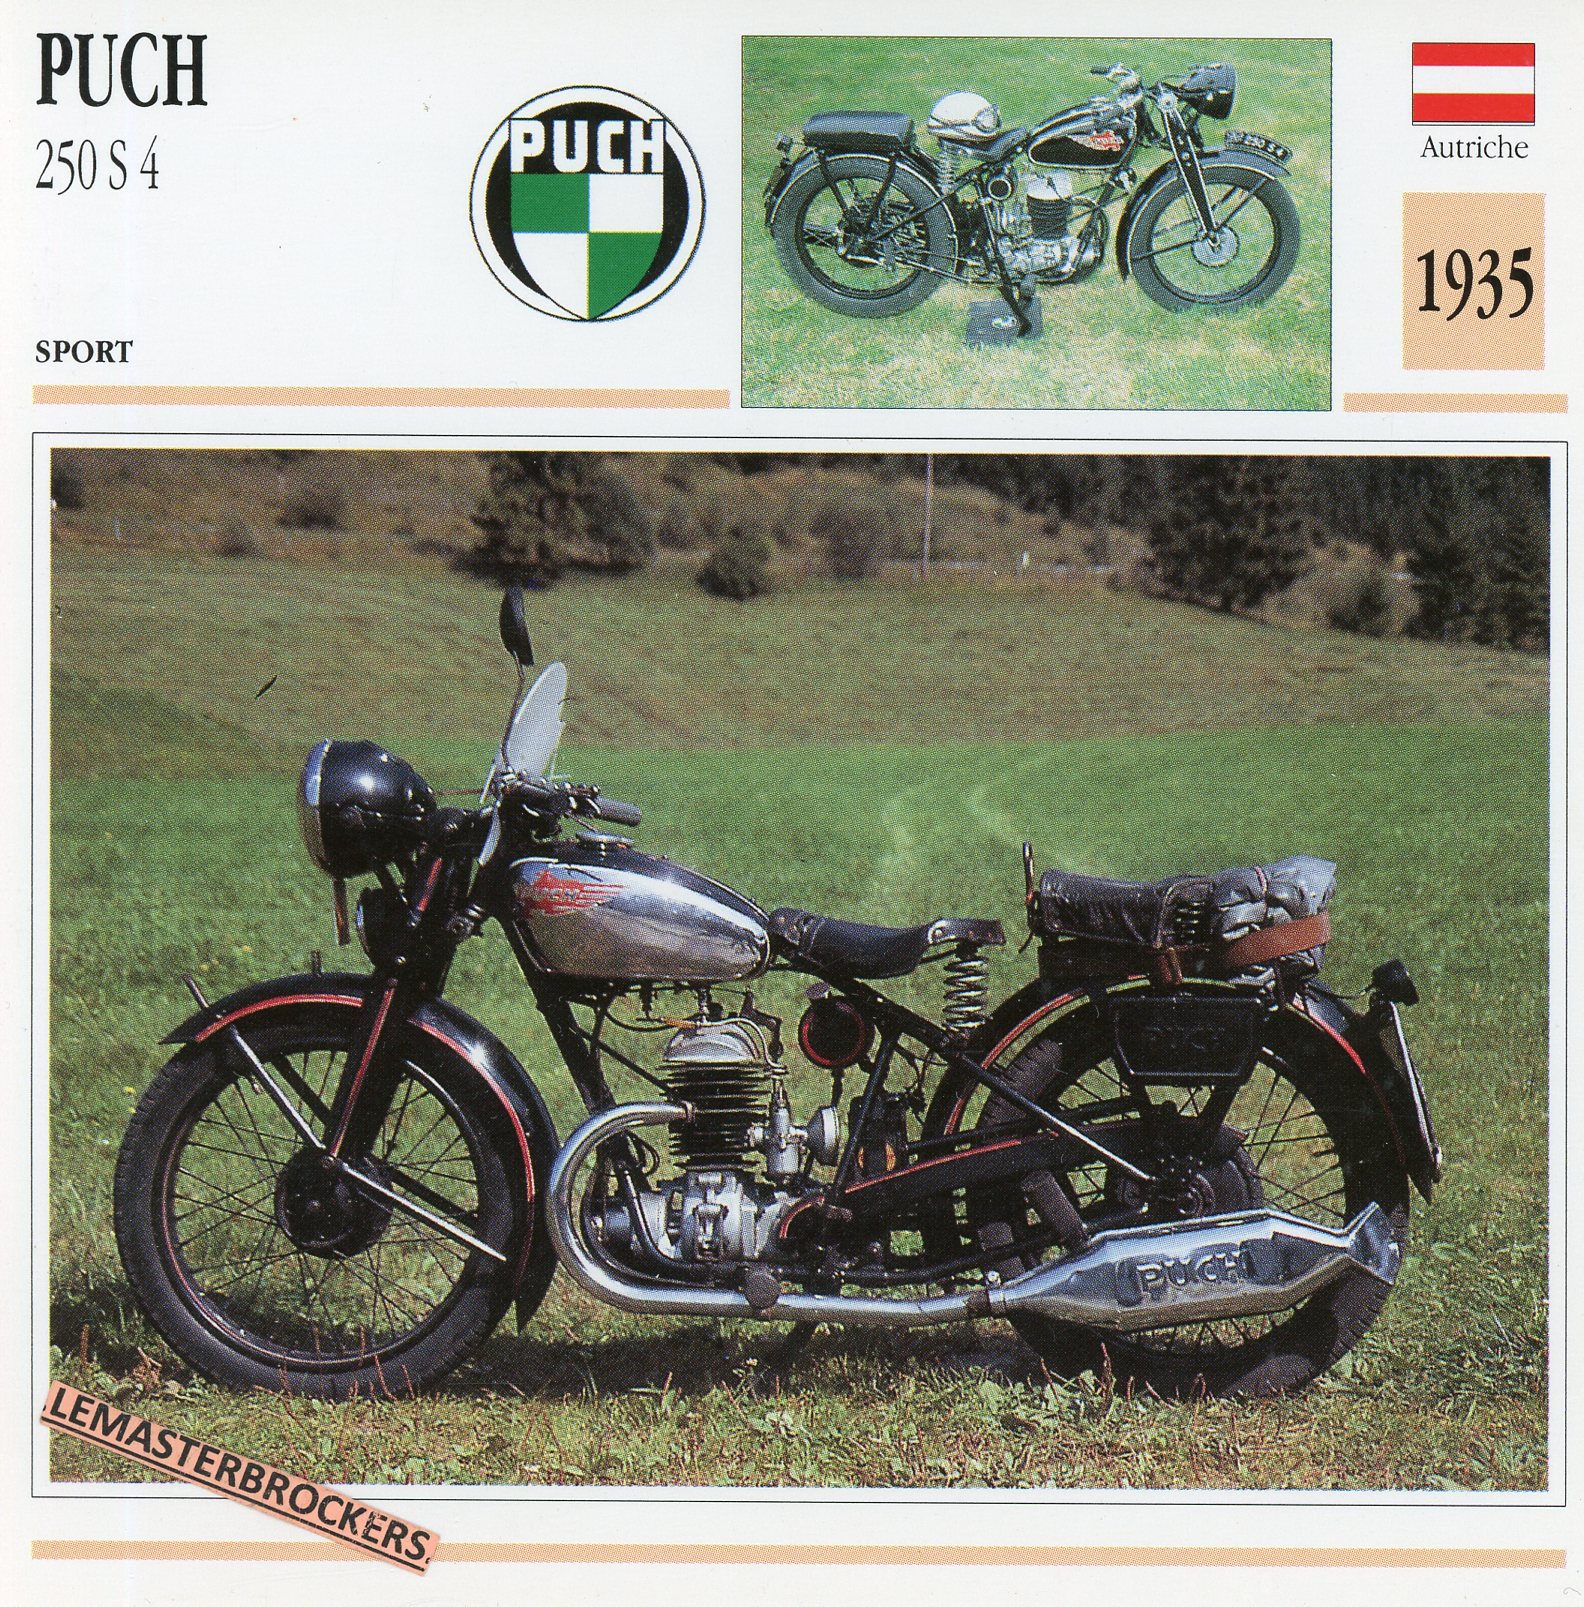 PUCH-250-S4-1935-FICHE-MOTO-MOTORCYCLE-CARDS-ATLAS-LEMASTERBROCKERS